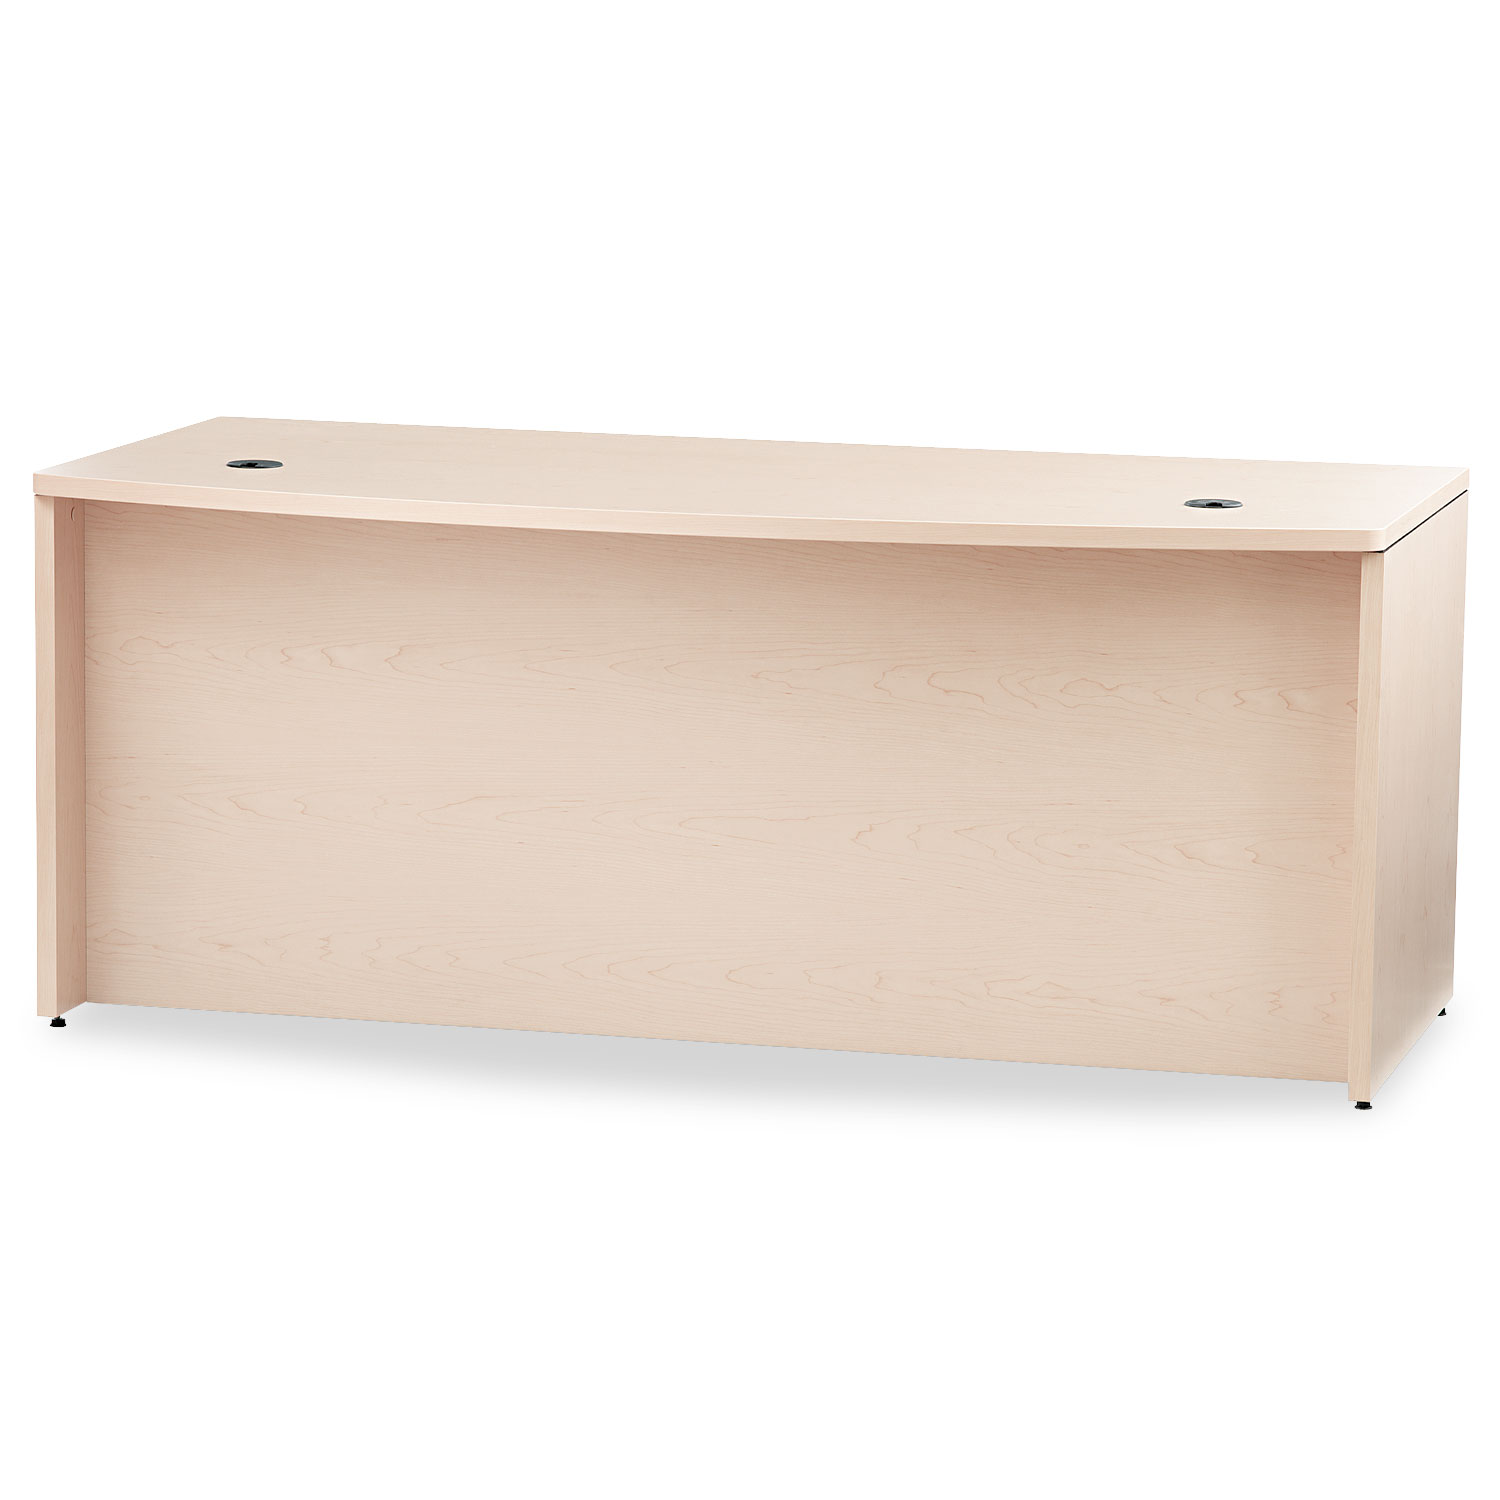 10500 Series Bow Front Desk, 3/4-Height Double Peds, 72 x 36 x 29-1/2, Nat Maple